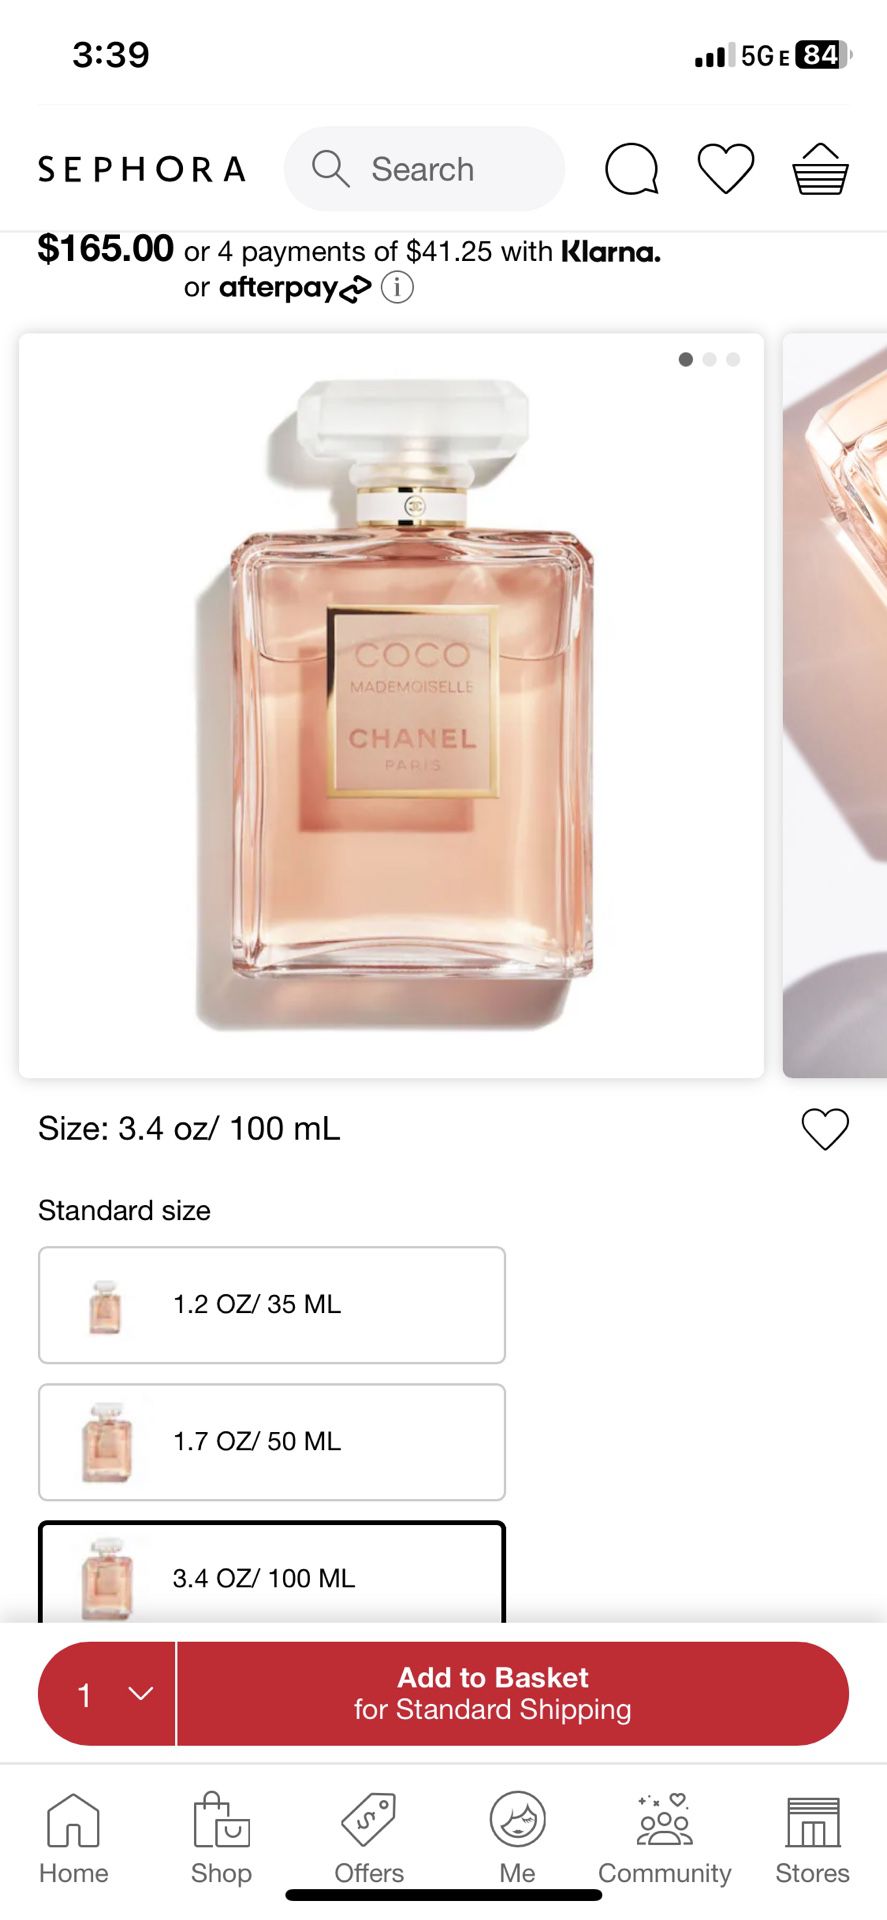 Chanel Coco Mademoiselle Edp 100ml Fragrance Perfume for Sale in West  Sacramento, CA - OfferUp